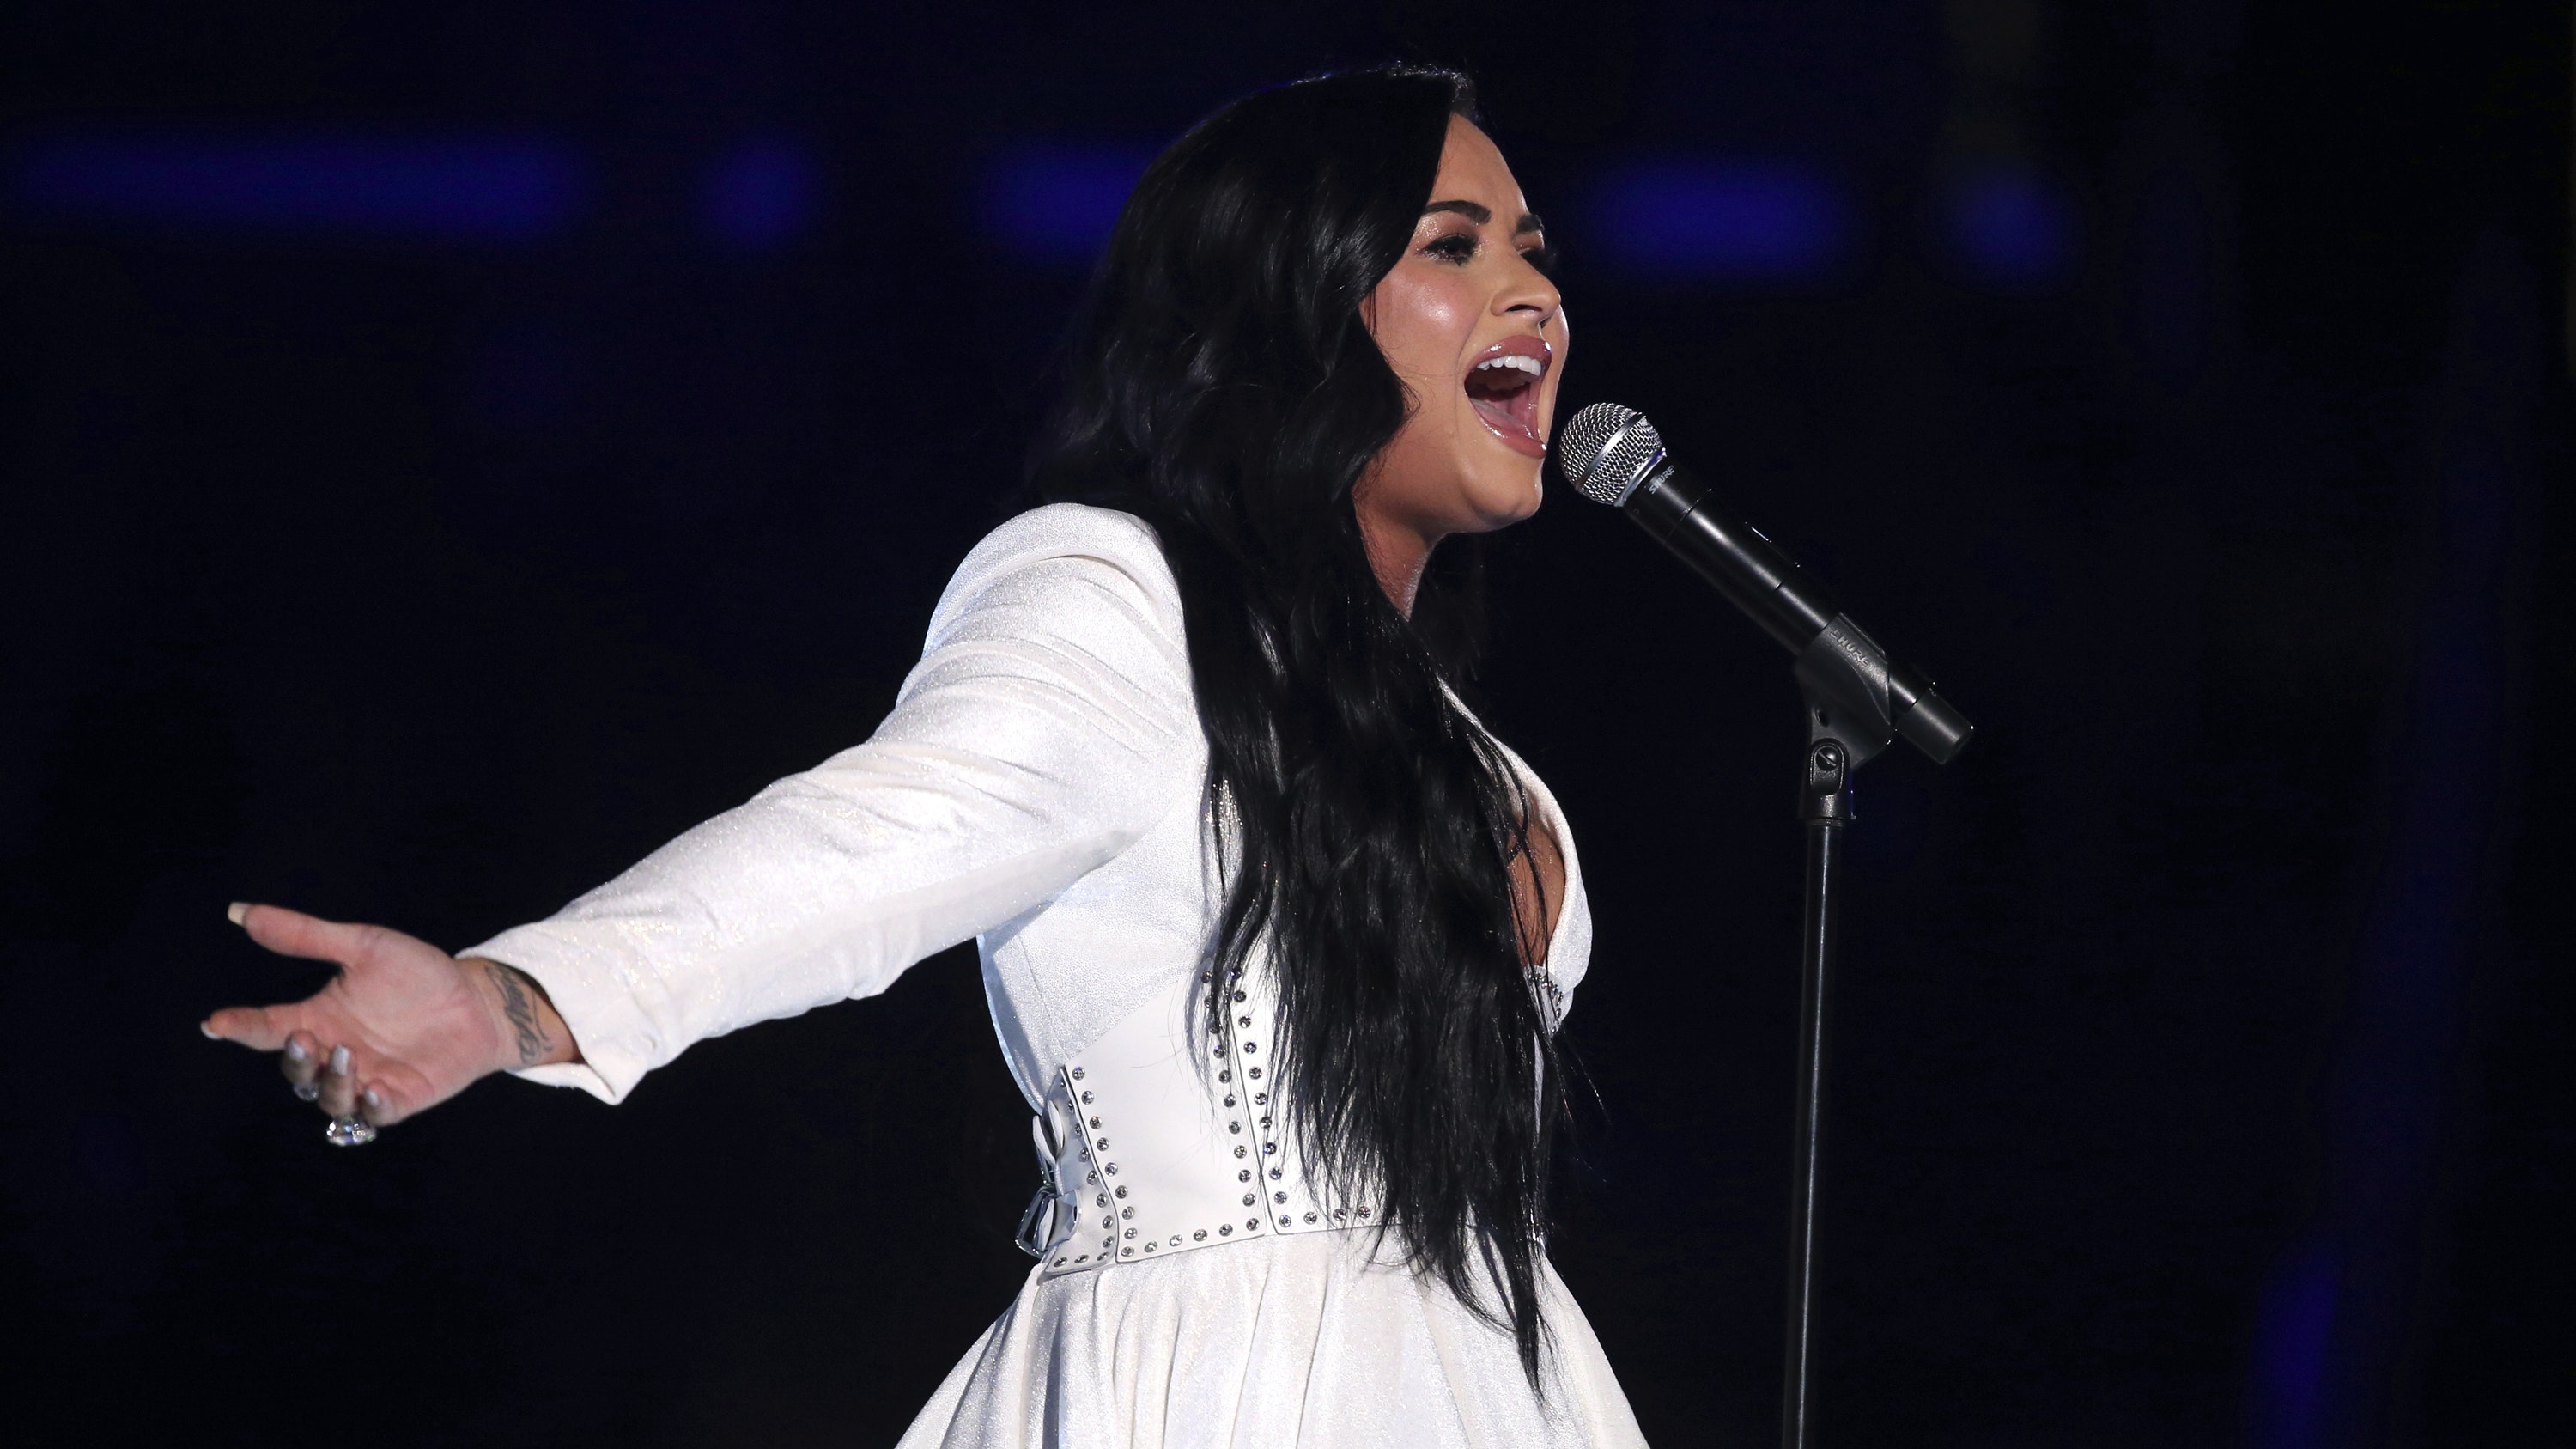 Demi Lovato delivers powerful performance during emotional Grammys return